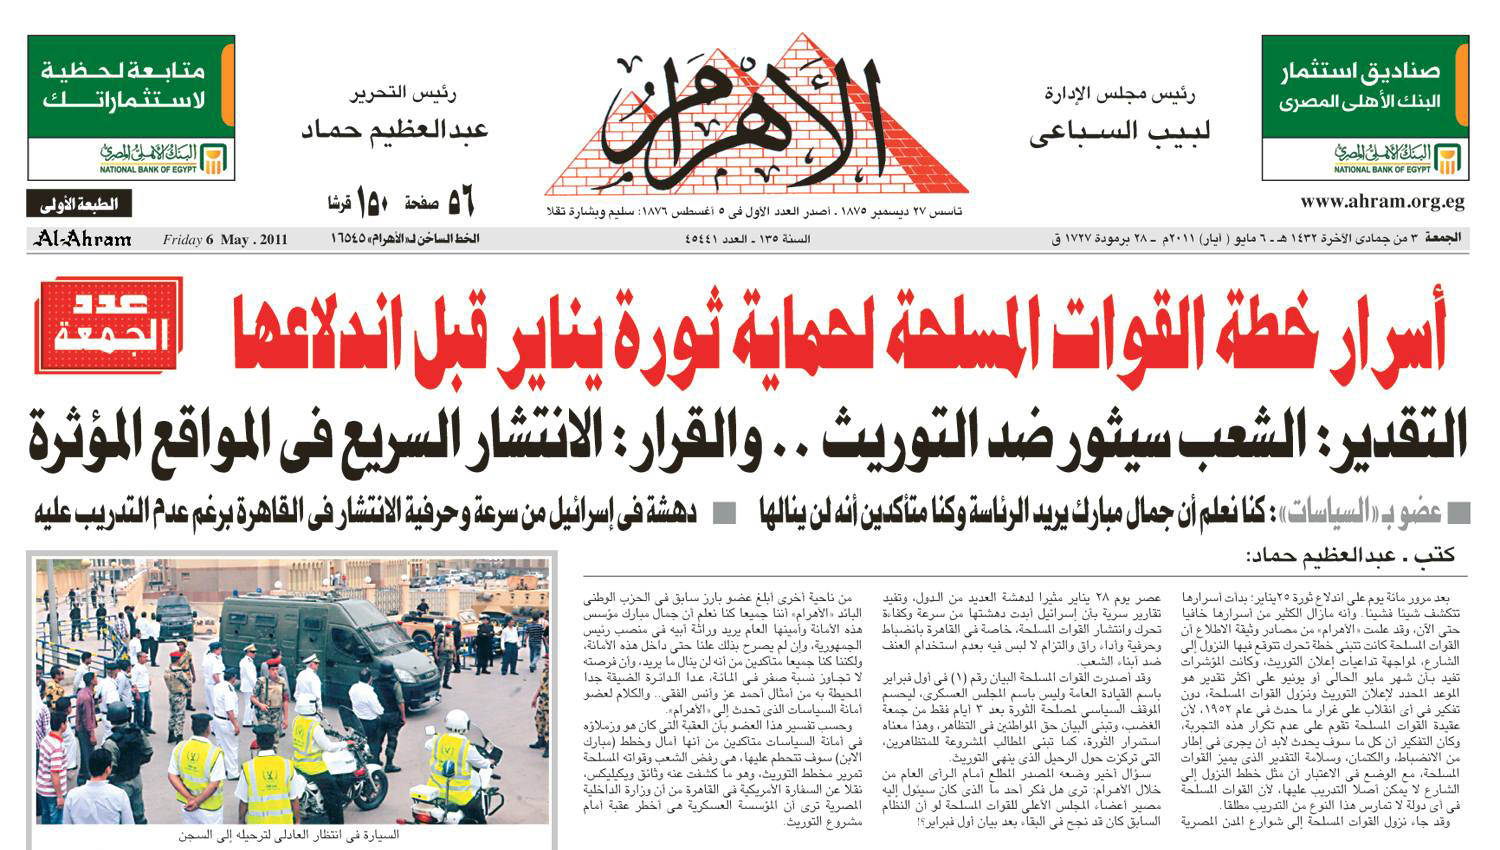 Alleged intended Coup d'État against Gamal Mubarak as reported on the front page of the Egyptian daily Al-Ahram, May 6, 2011.